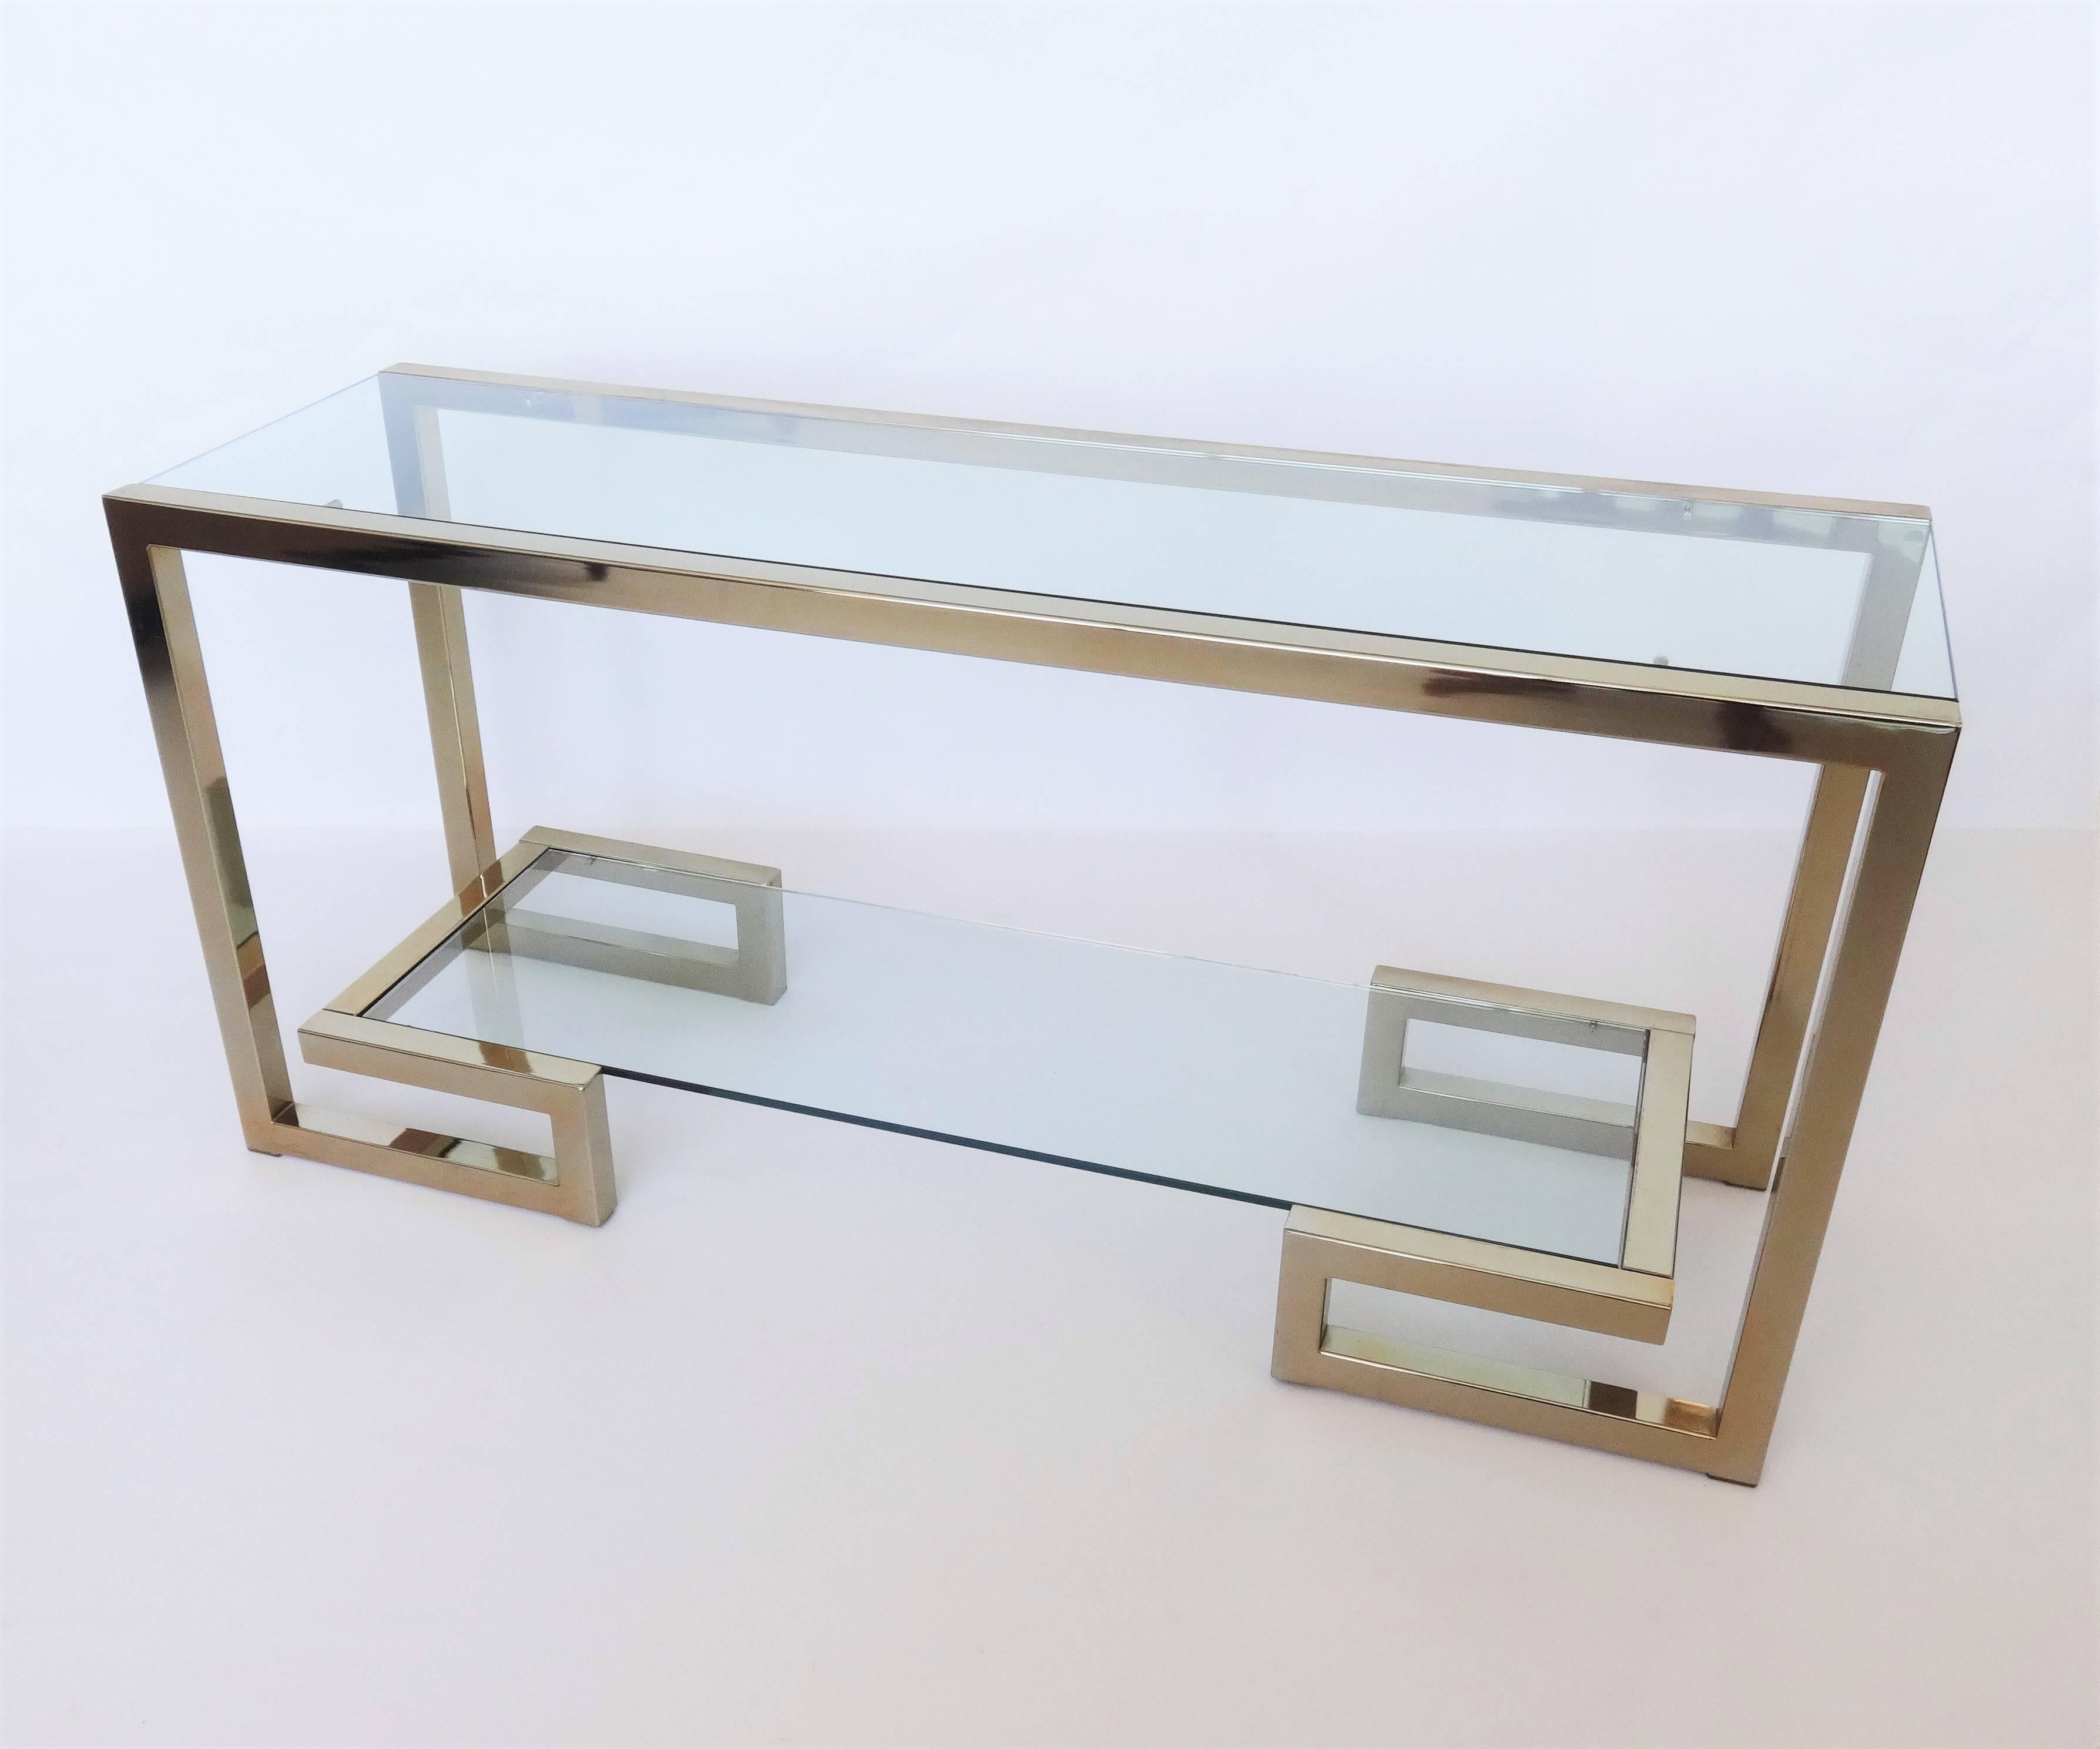 Statement making Milo Baughman style console. Striking from every angle. This console table has two floating shelves, and the bottom shelf sits on a Greek key base. Glass with polished brass frame. Finished on all sides.